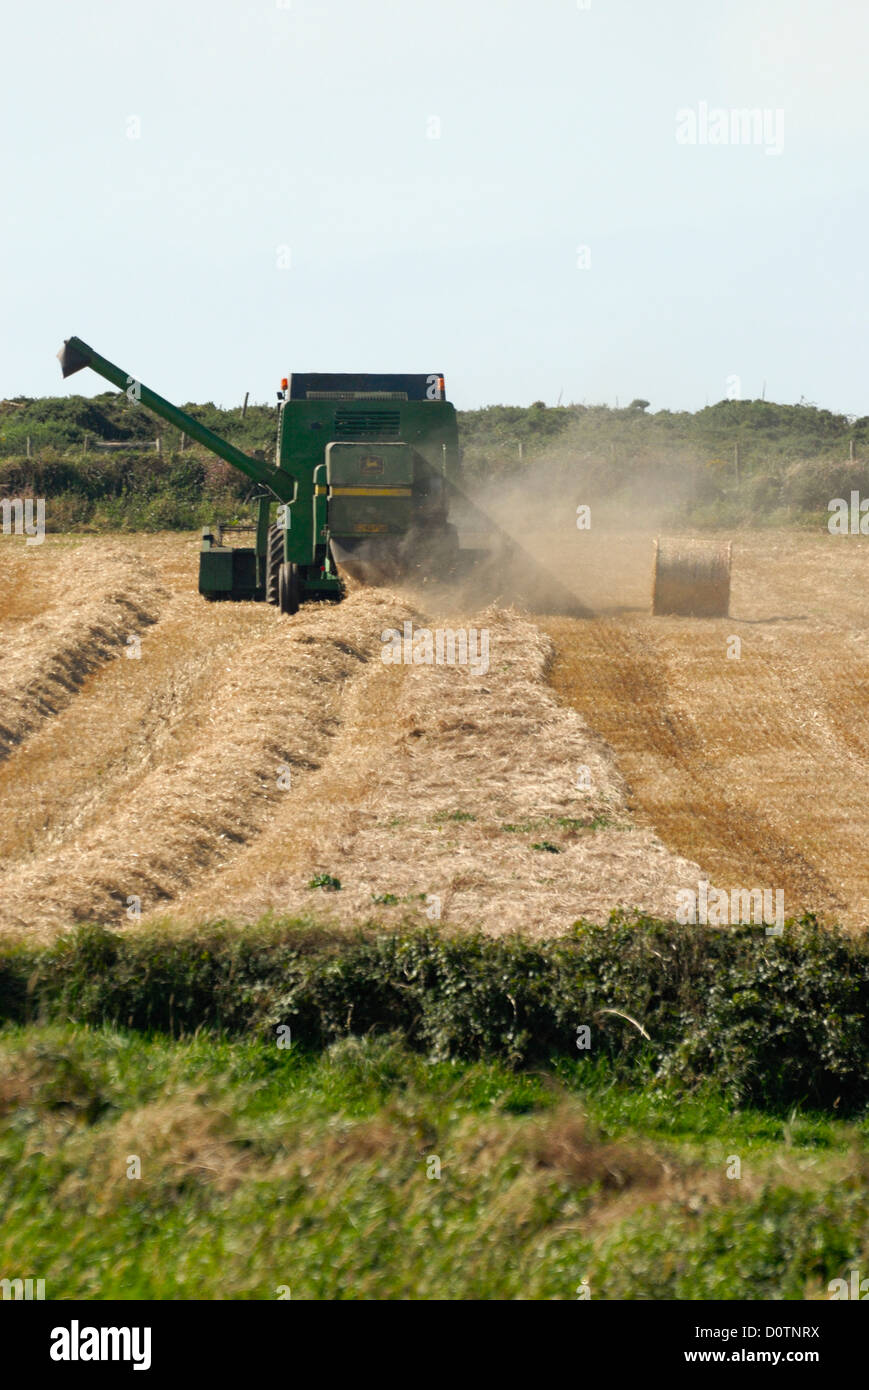 A combine harvester in a small field cutting hay for silage in the sunshine Stock Photo